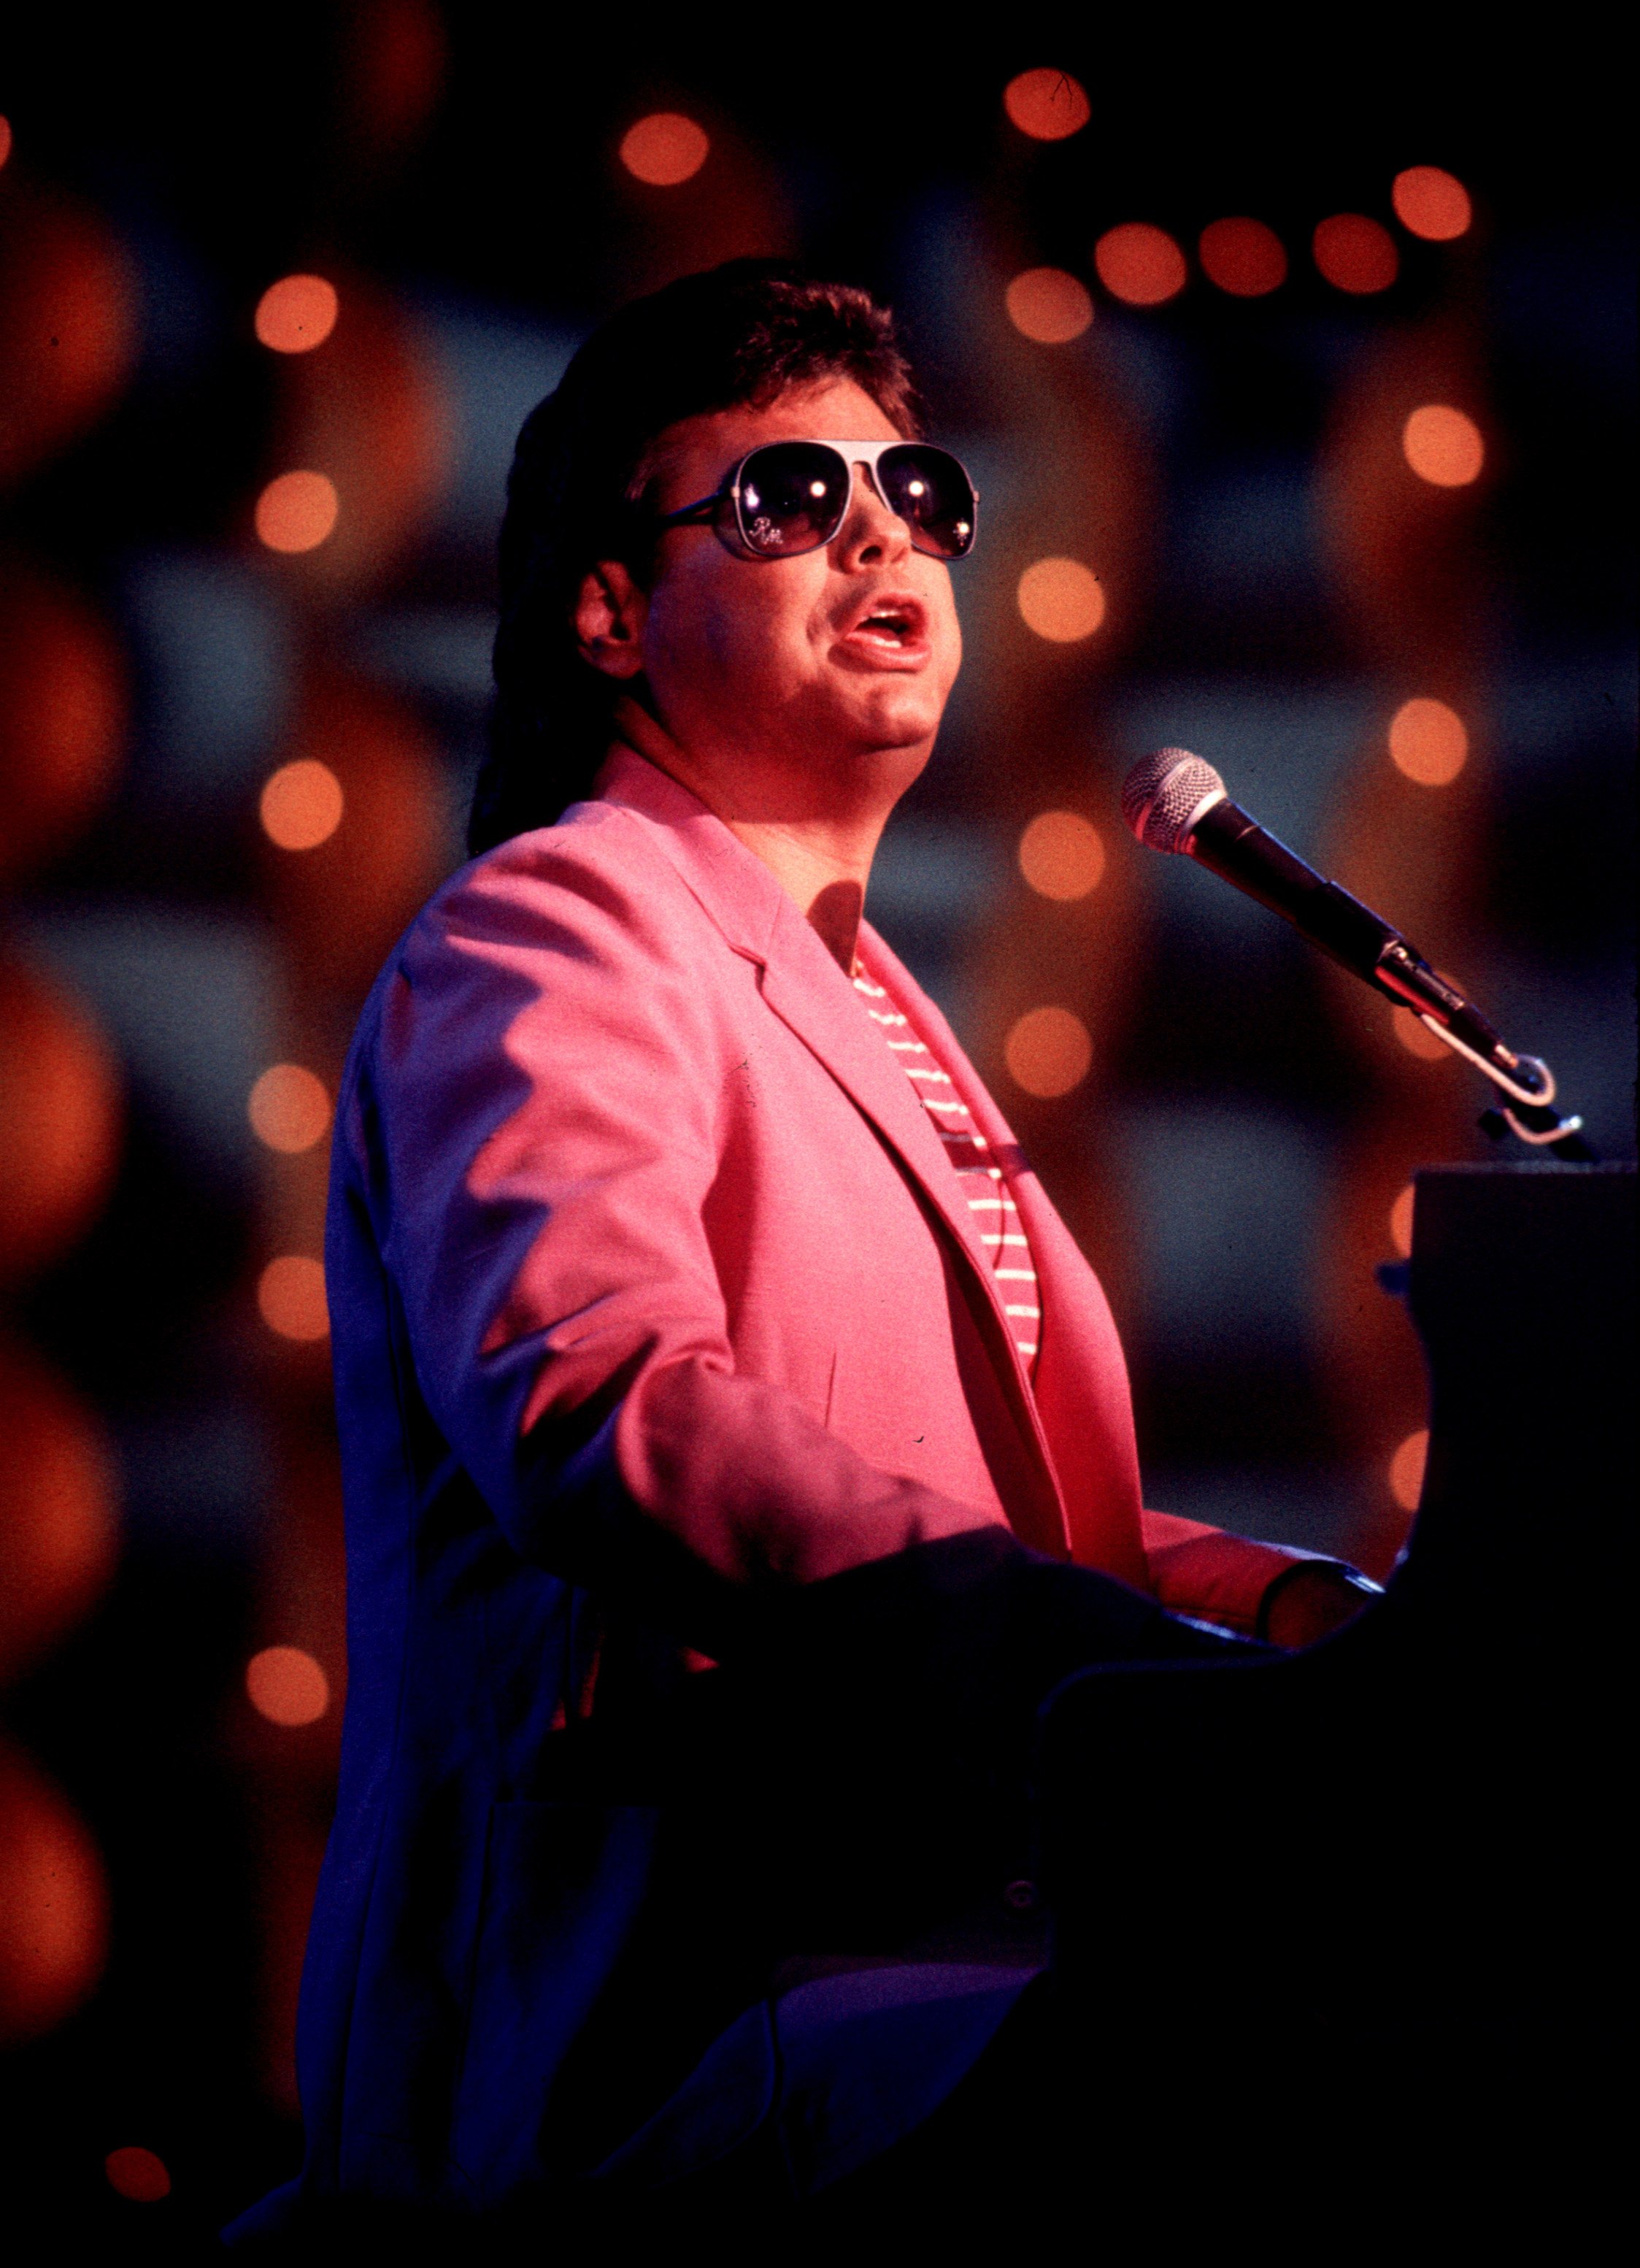 Ronnie Milsap performing at the "Solid Gold" TV show | Source: Getty Images